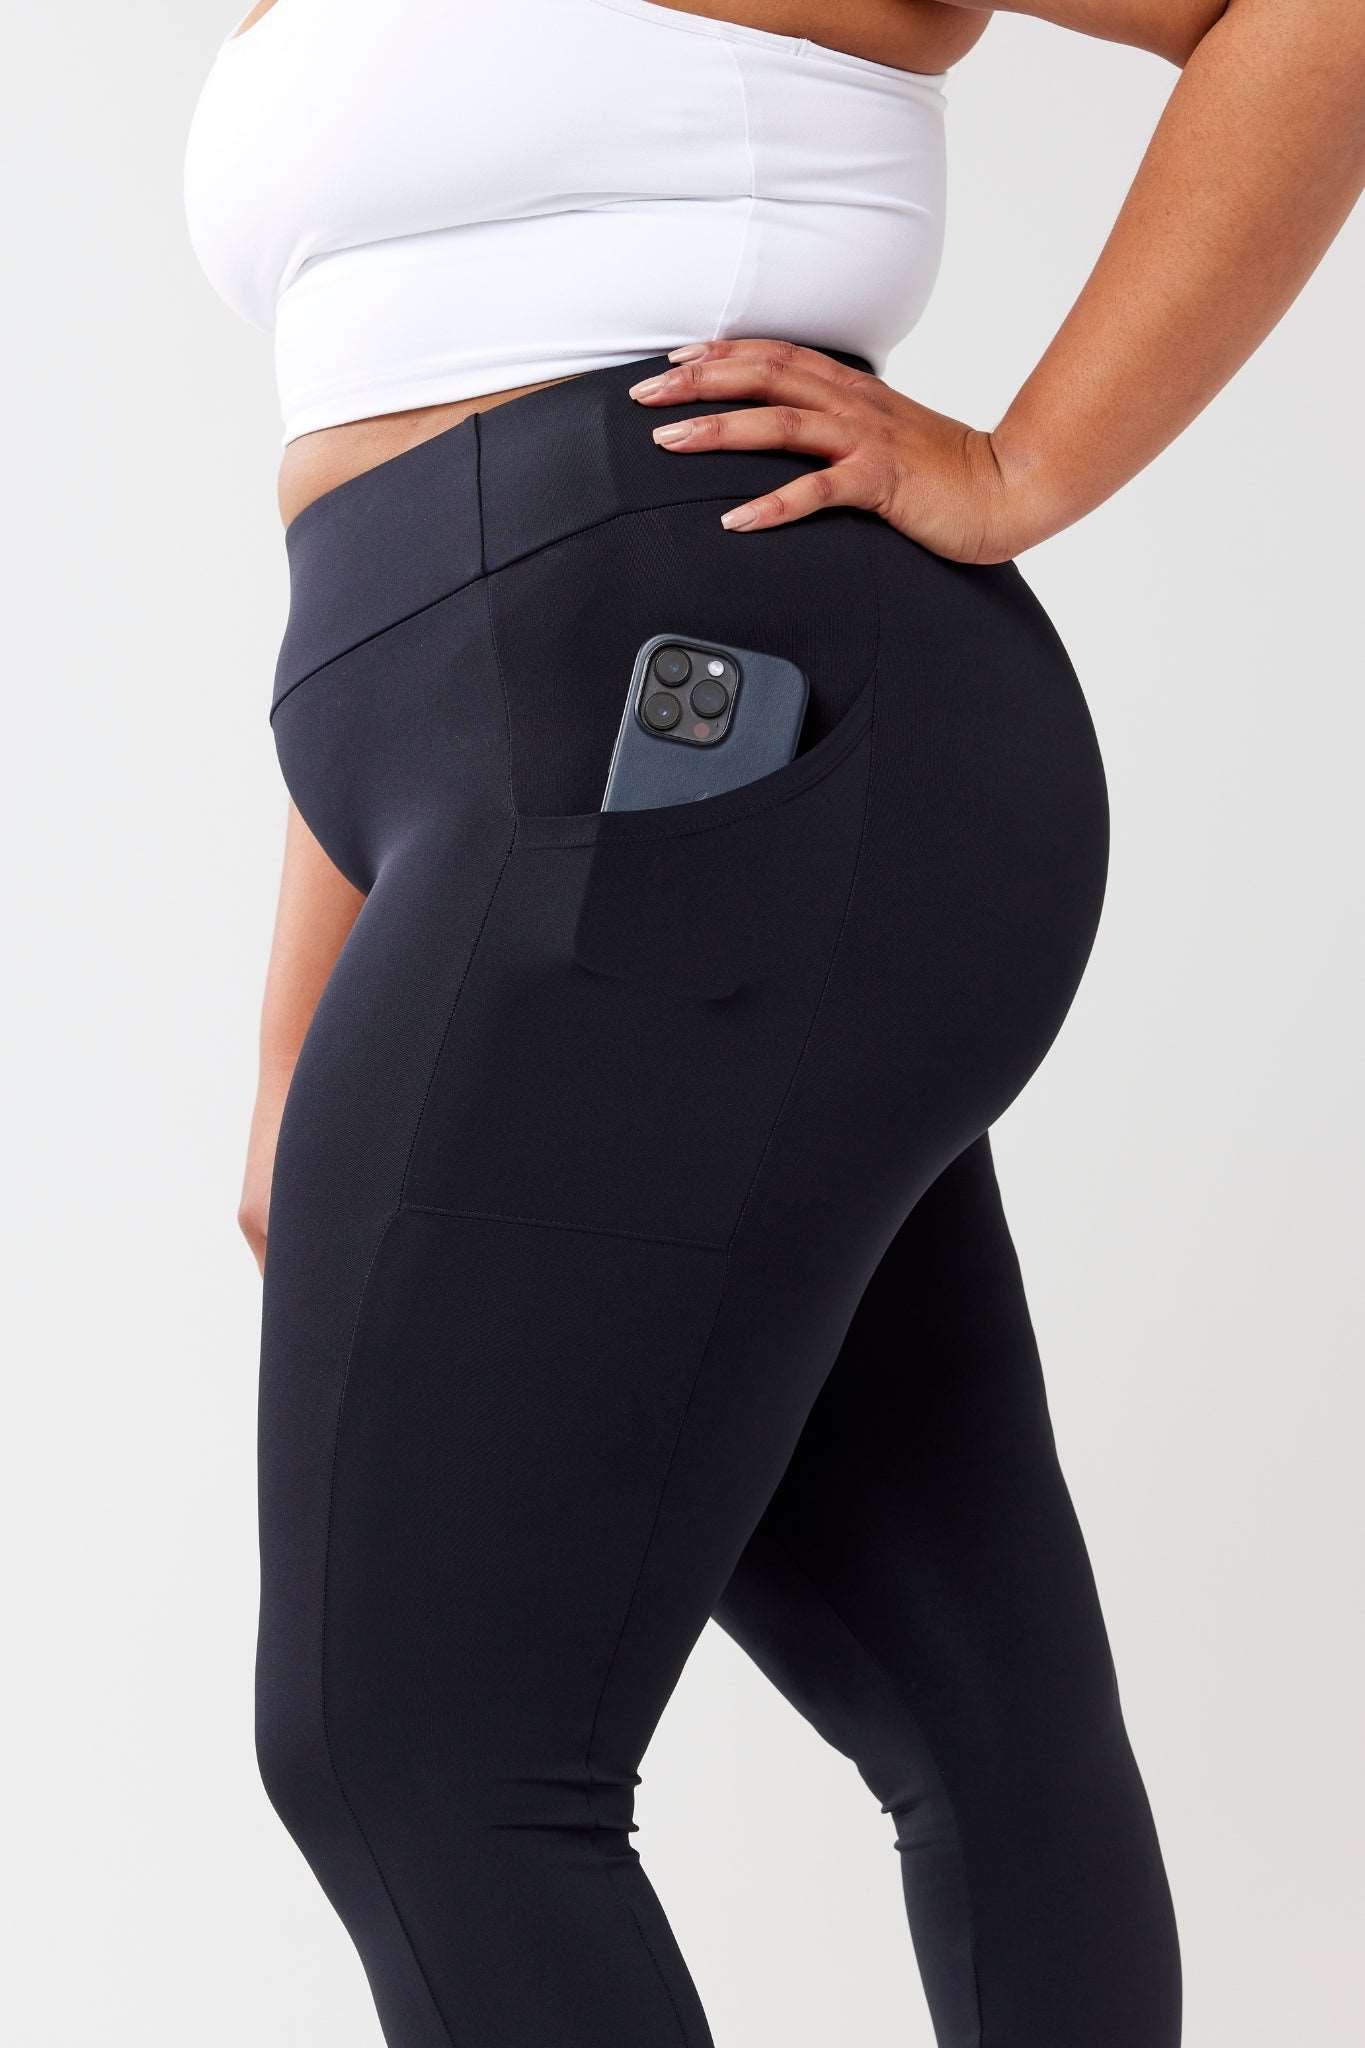 This Company is Giving Away Free Leggings - The Kit